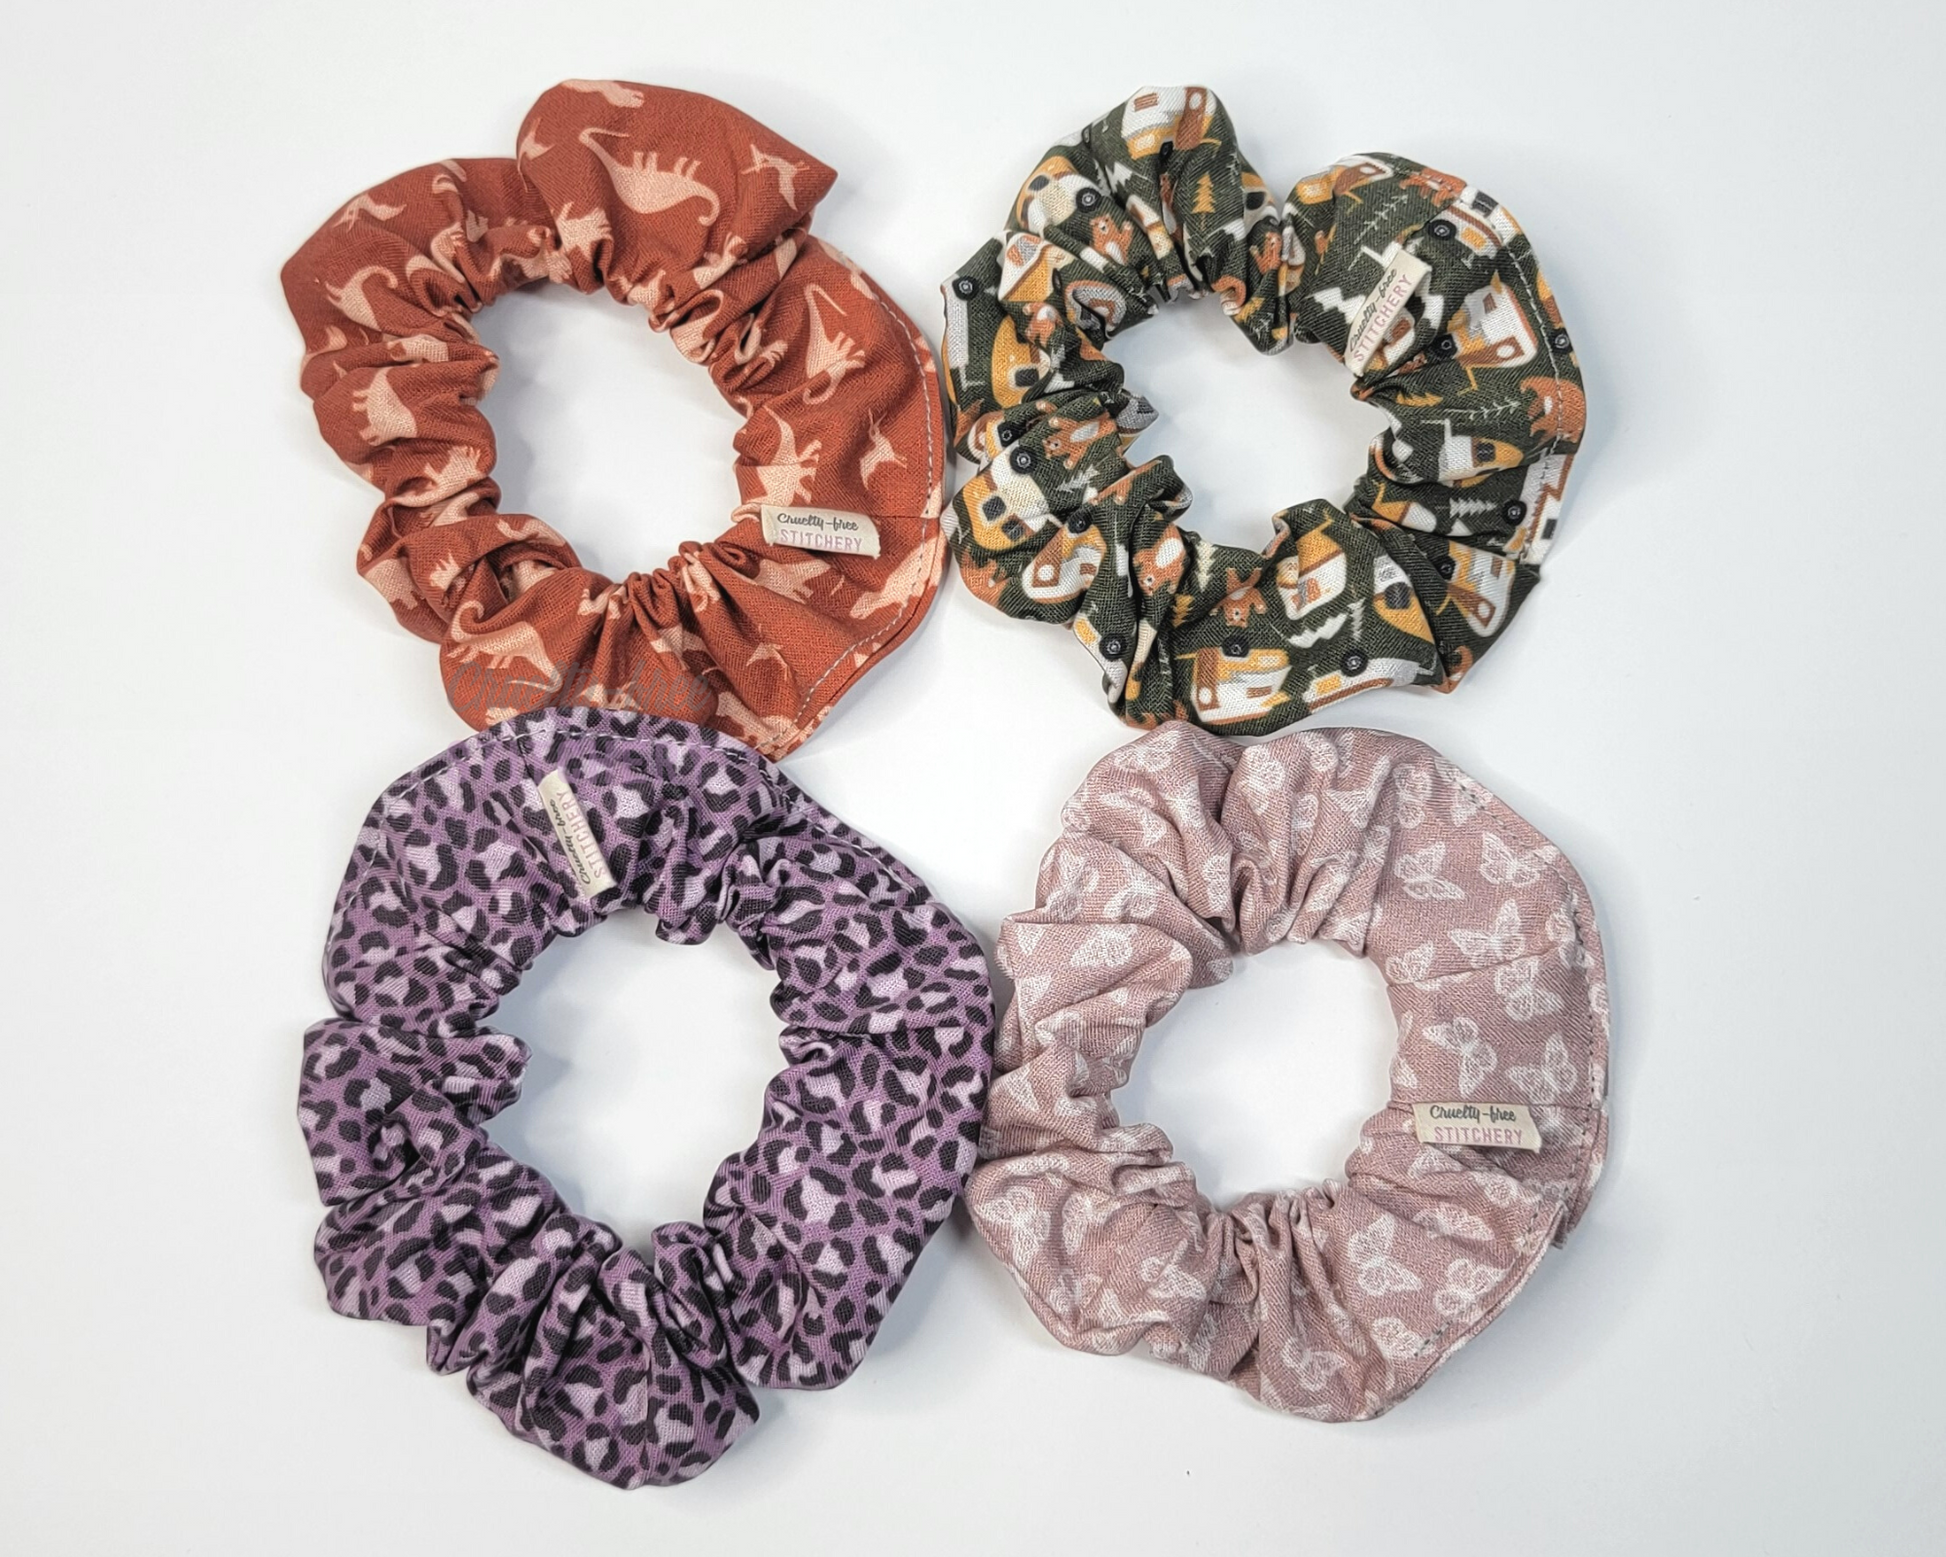 Four scrunchies on a white background. A dark orange with dinosaurs, dark green with campers and bears, violet purple leopard print, and a mauve pink with tiny white butterflies.